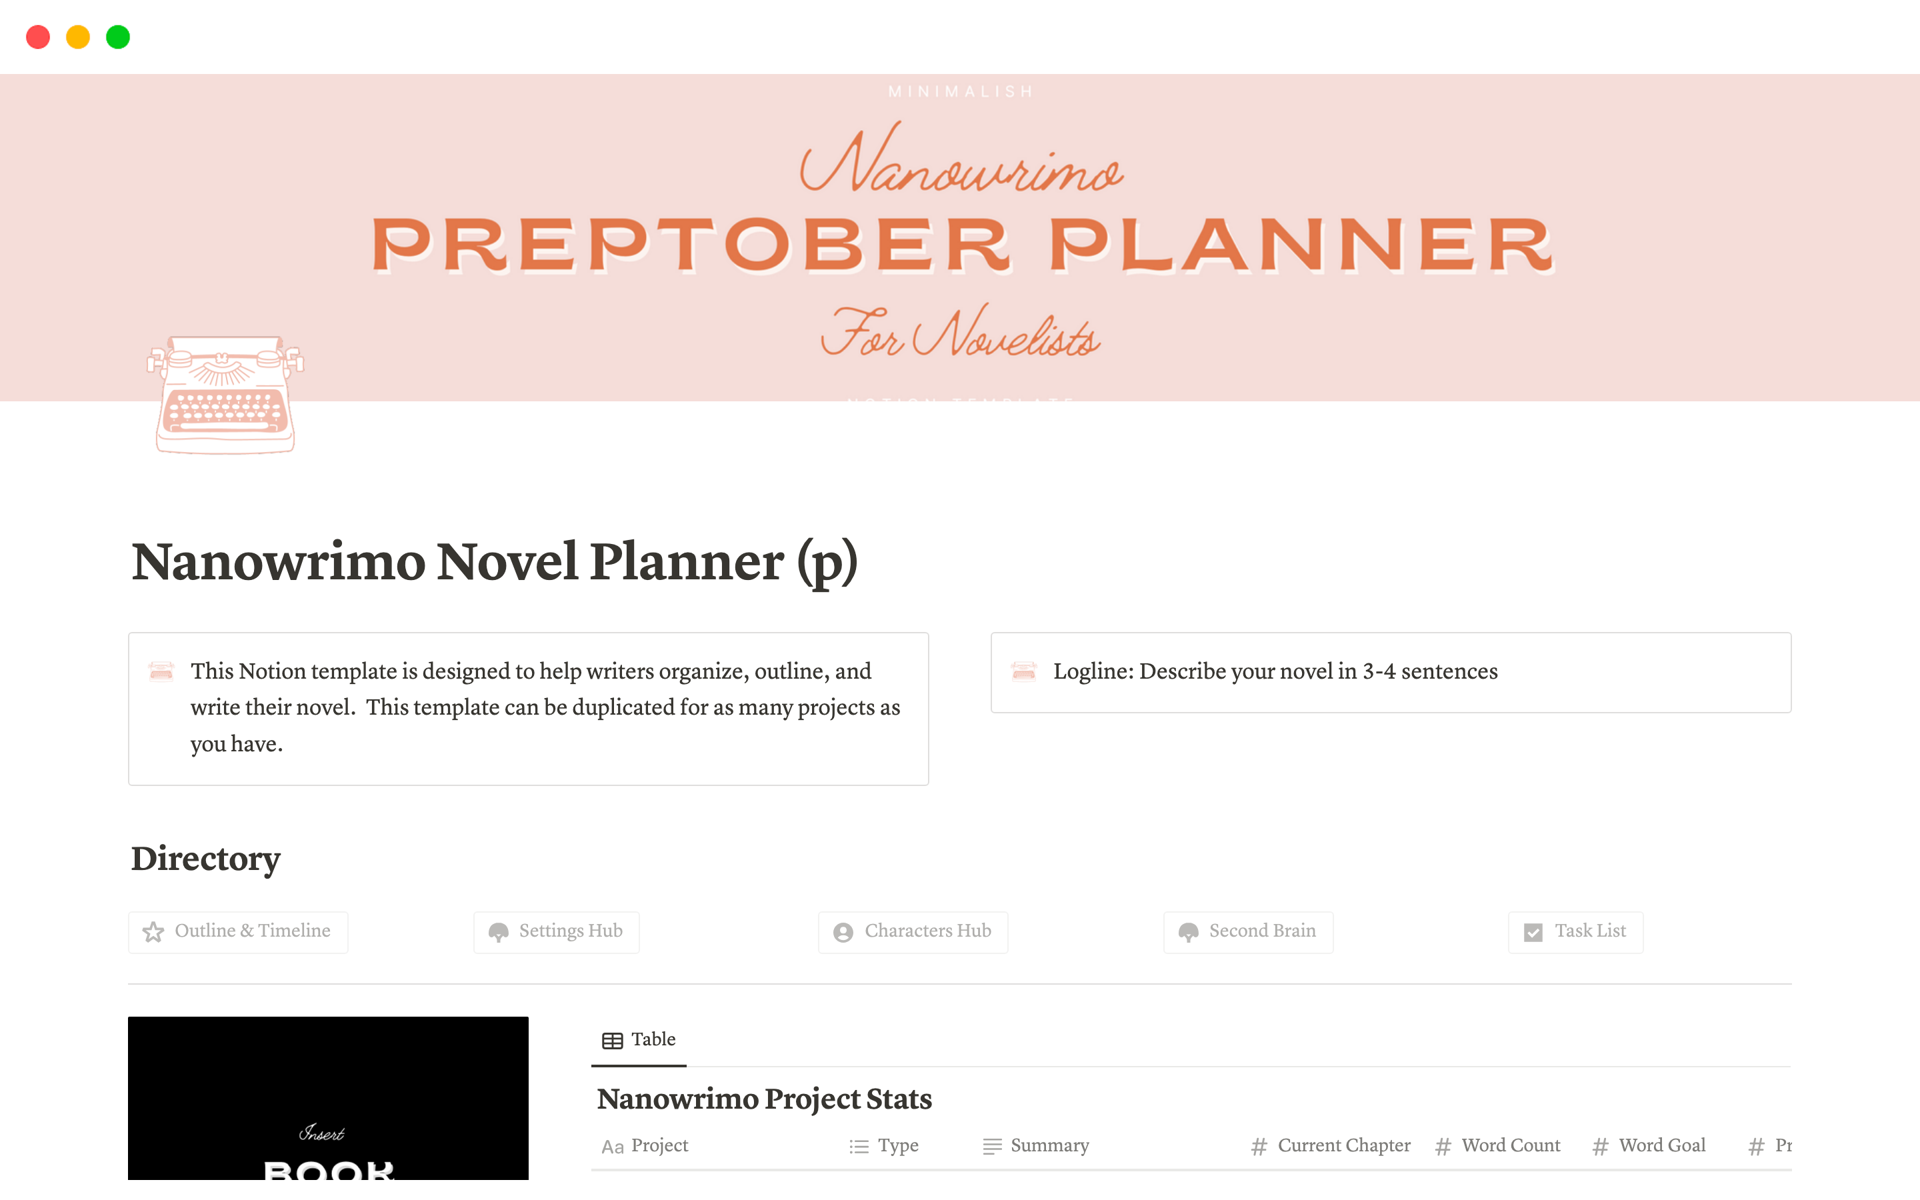 Get ready for Nanowrimo with this Preptober Novel Planner with hubs to get your novel planned, outlined, revised, and edited this year.